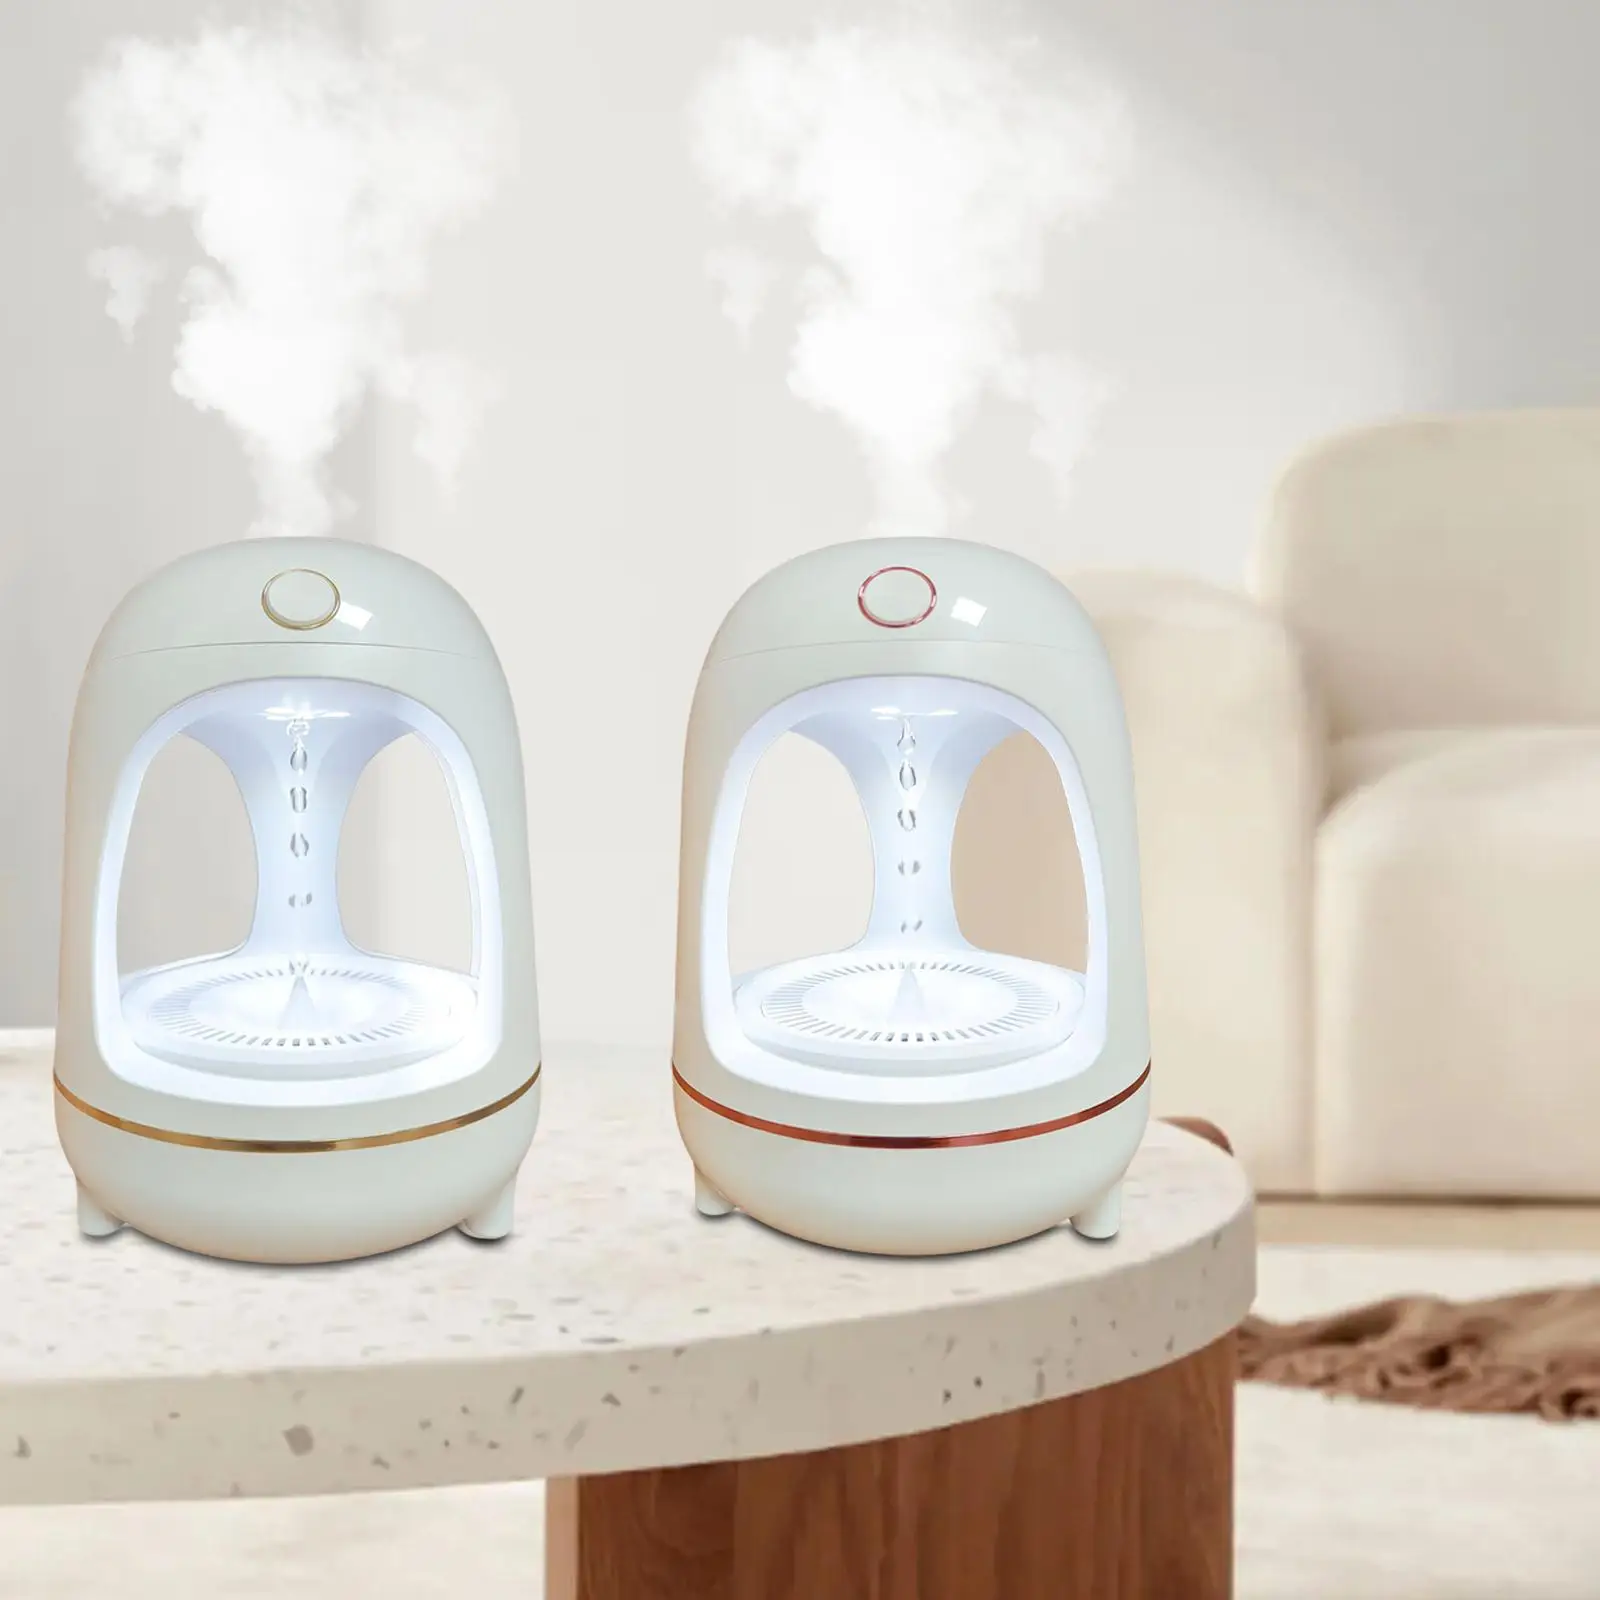 Personal Desktop Air Humidifier Antigravity Large Capacity with Color Changing Light Quiet USB for Yoga Hotel Indoor